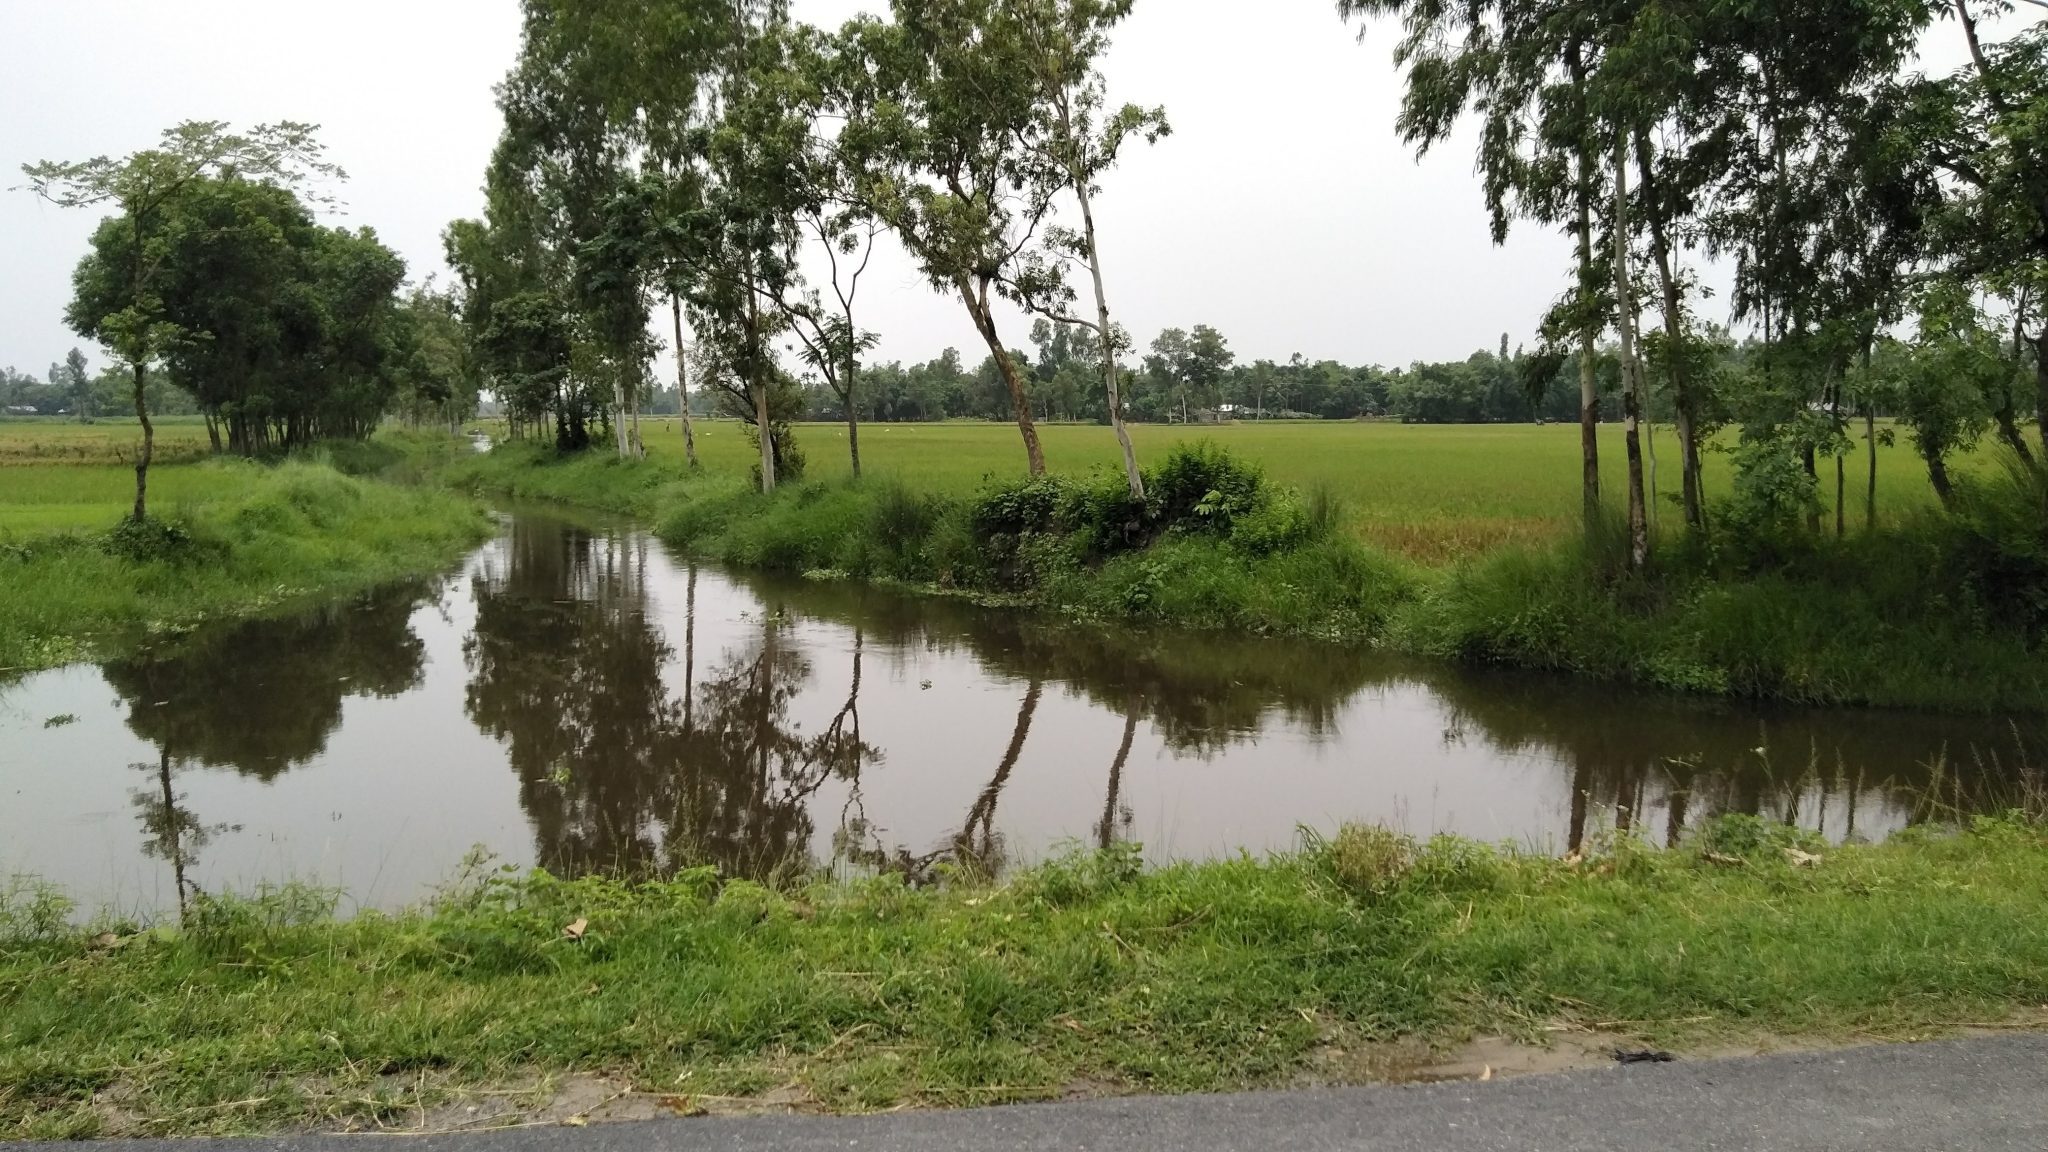 A small canal between the rural fields